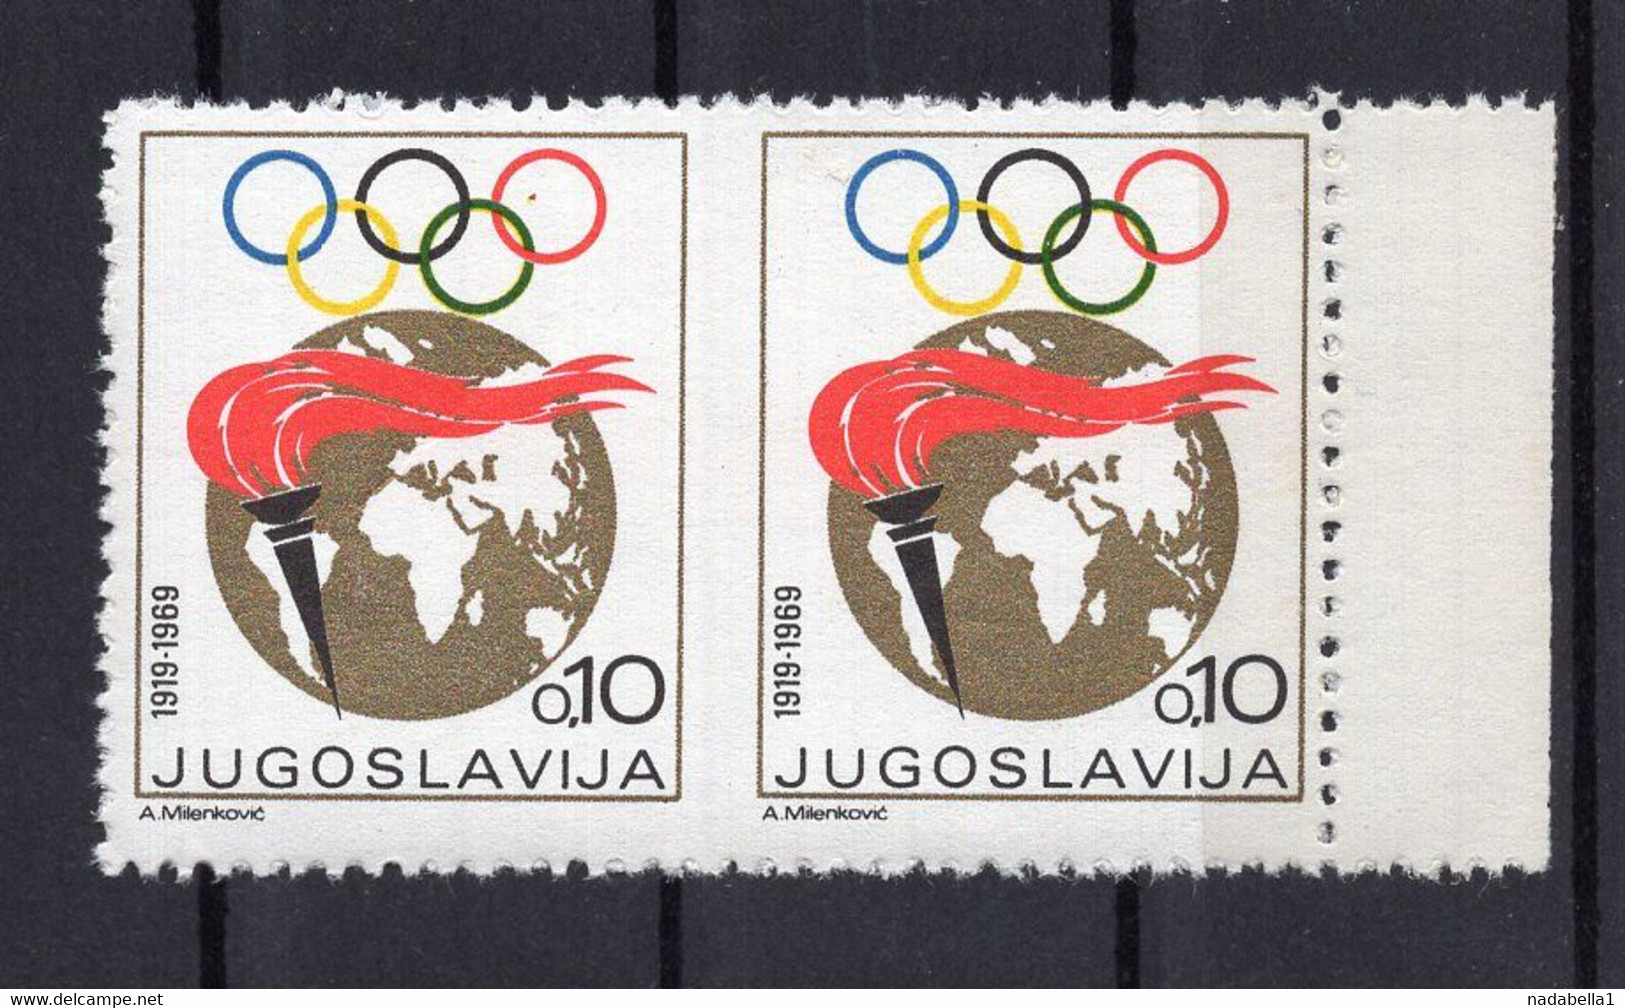 1969 YUGOSLAVIA, OLYMPIC GAMES, PAIR,IMPERF, 0.10 DIN. ADDITIONAL STAMP, MNH, COMPULSORY USE FOR ONE WEEK ONLY - Non Dentelés, épreuves & Variétés